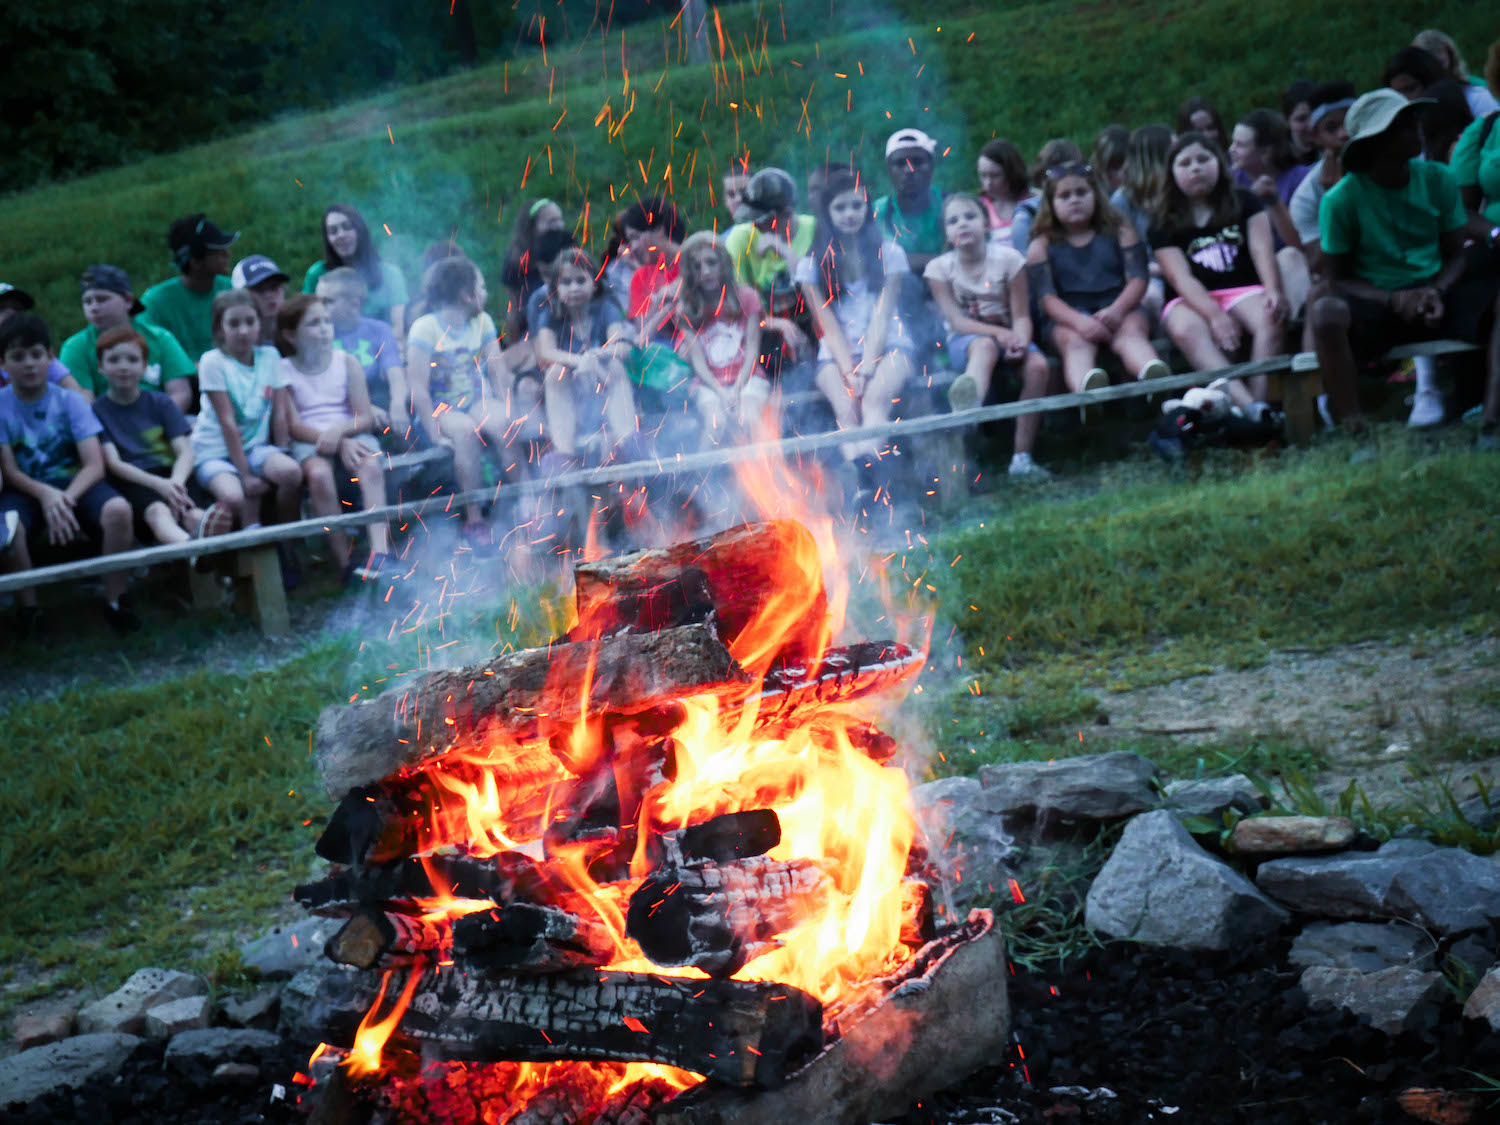 4-H campers sit around a firepit